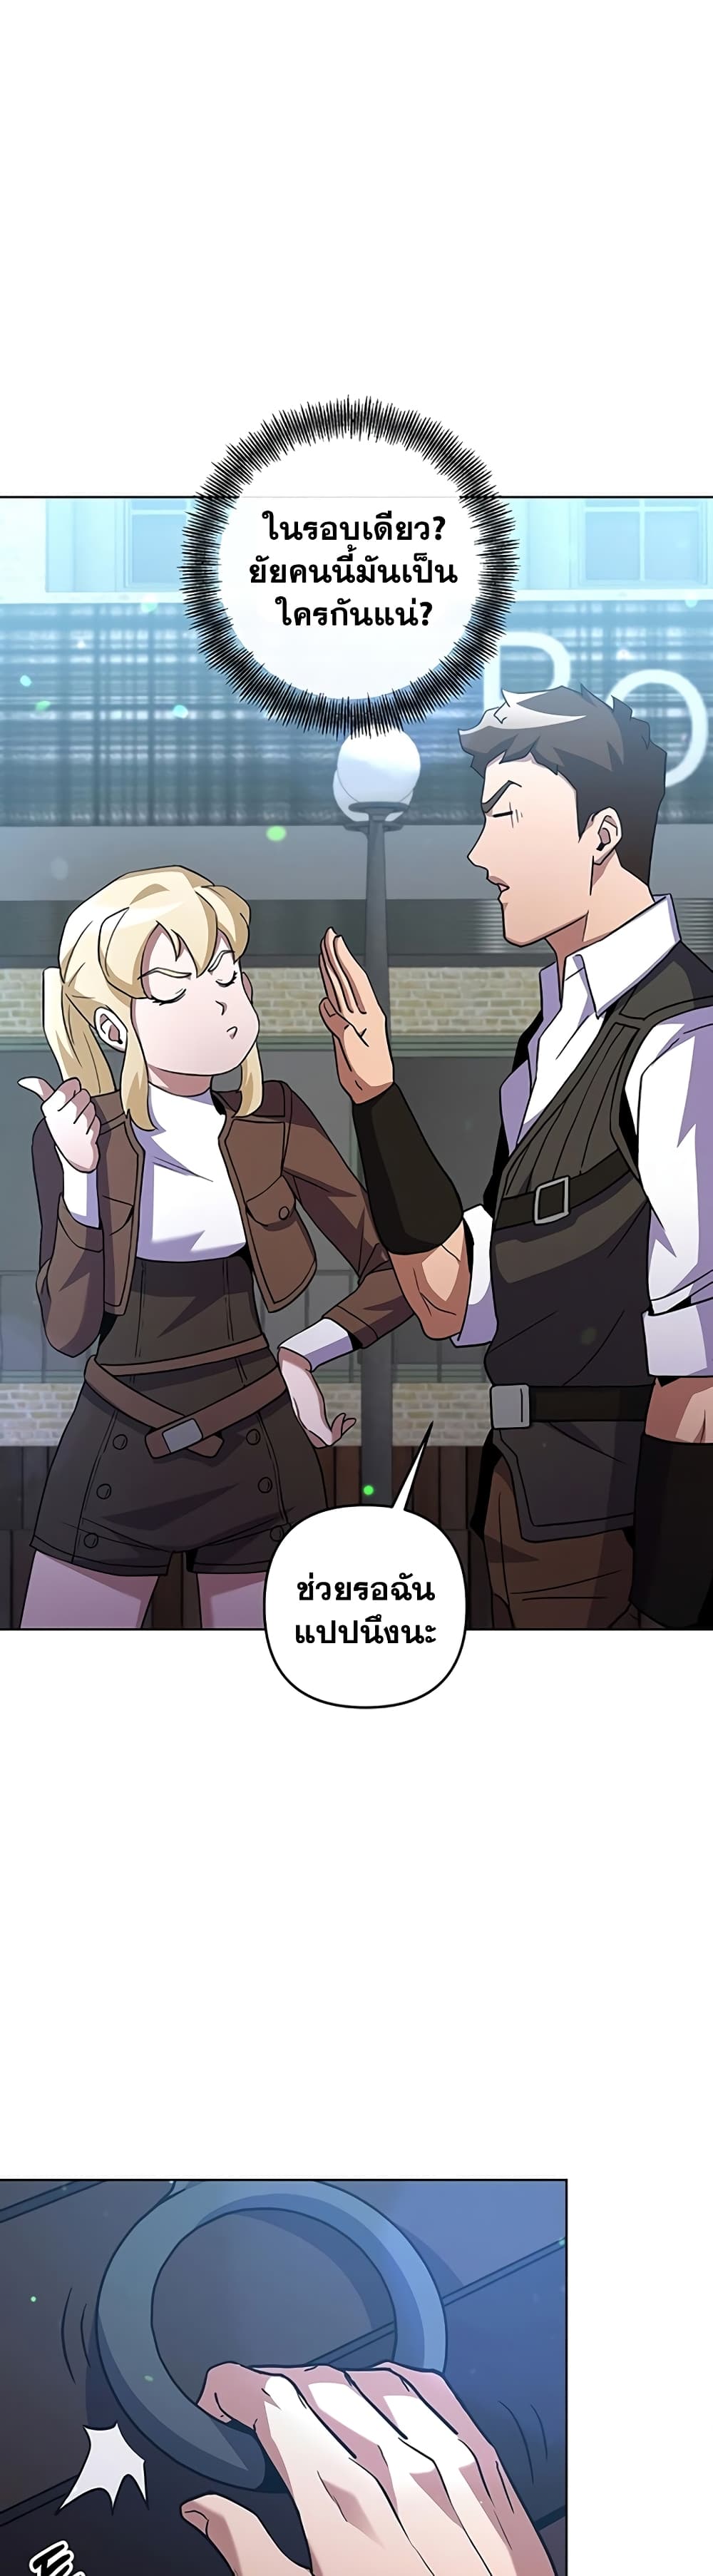 Surviving in an Action Manhwa 18 31